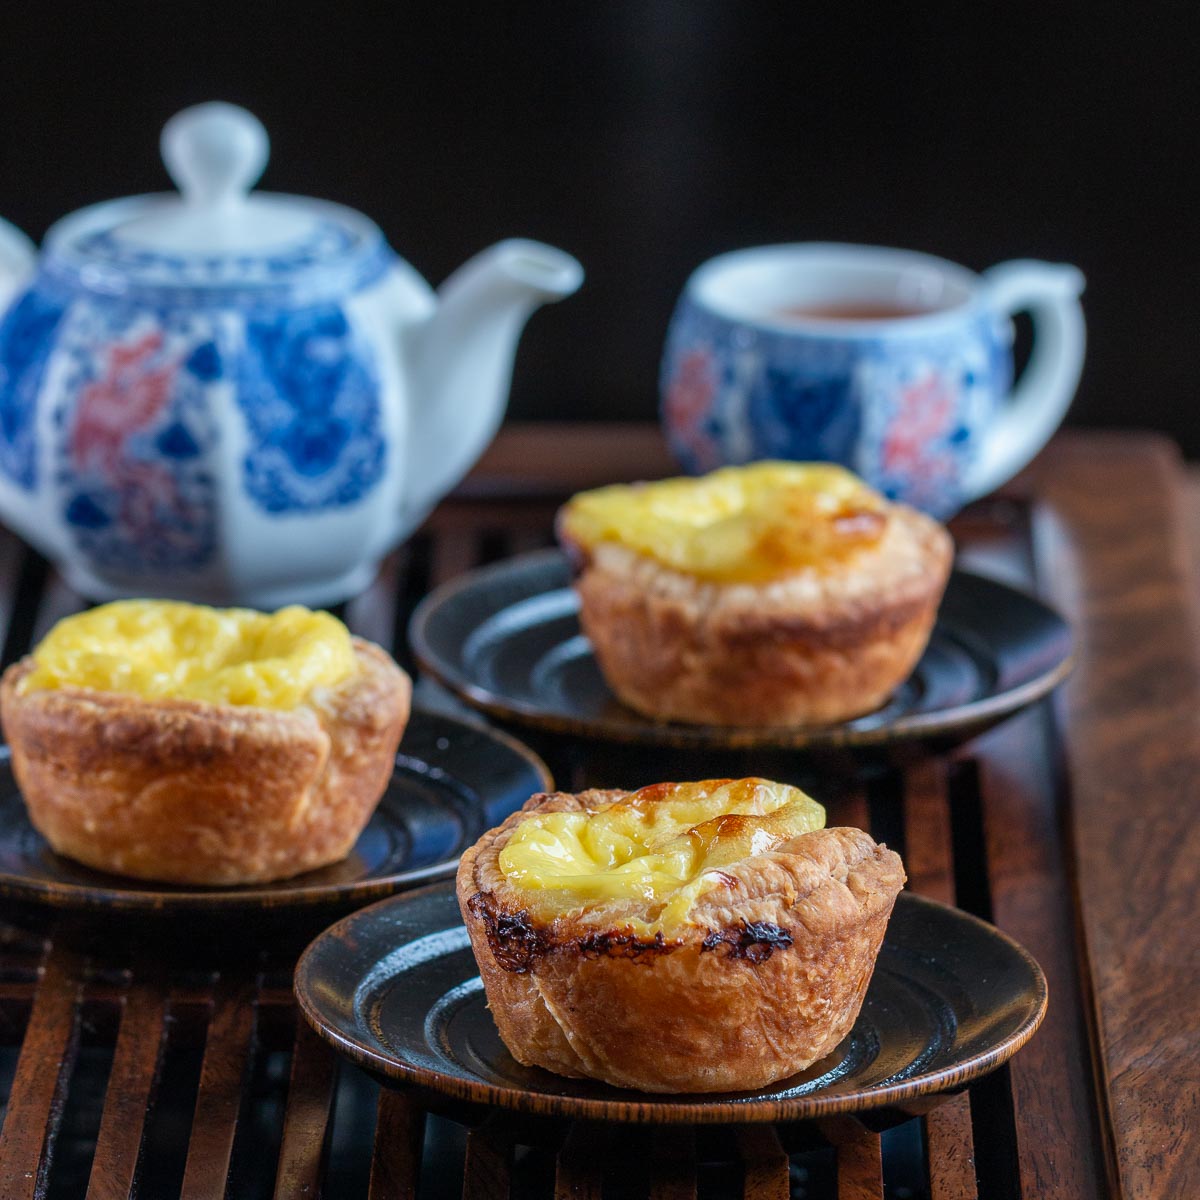 Yum Cha with Chinese egg tarts and a blue tea pot.